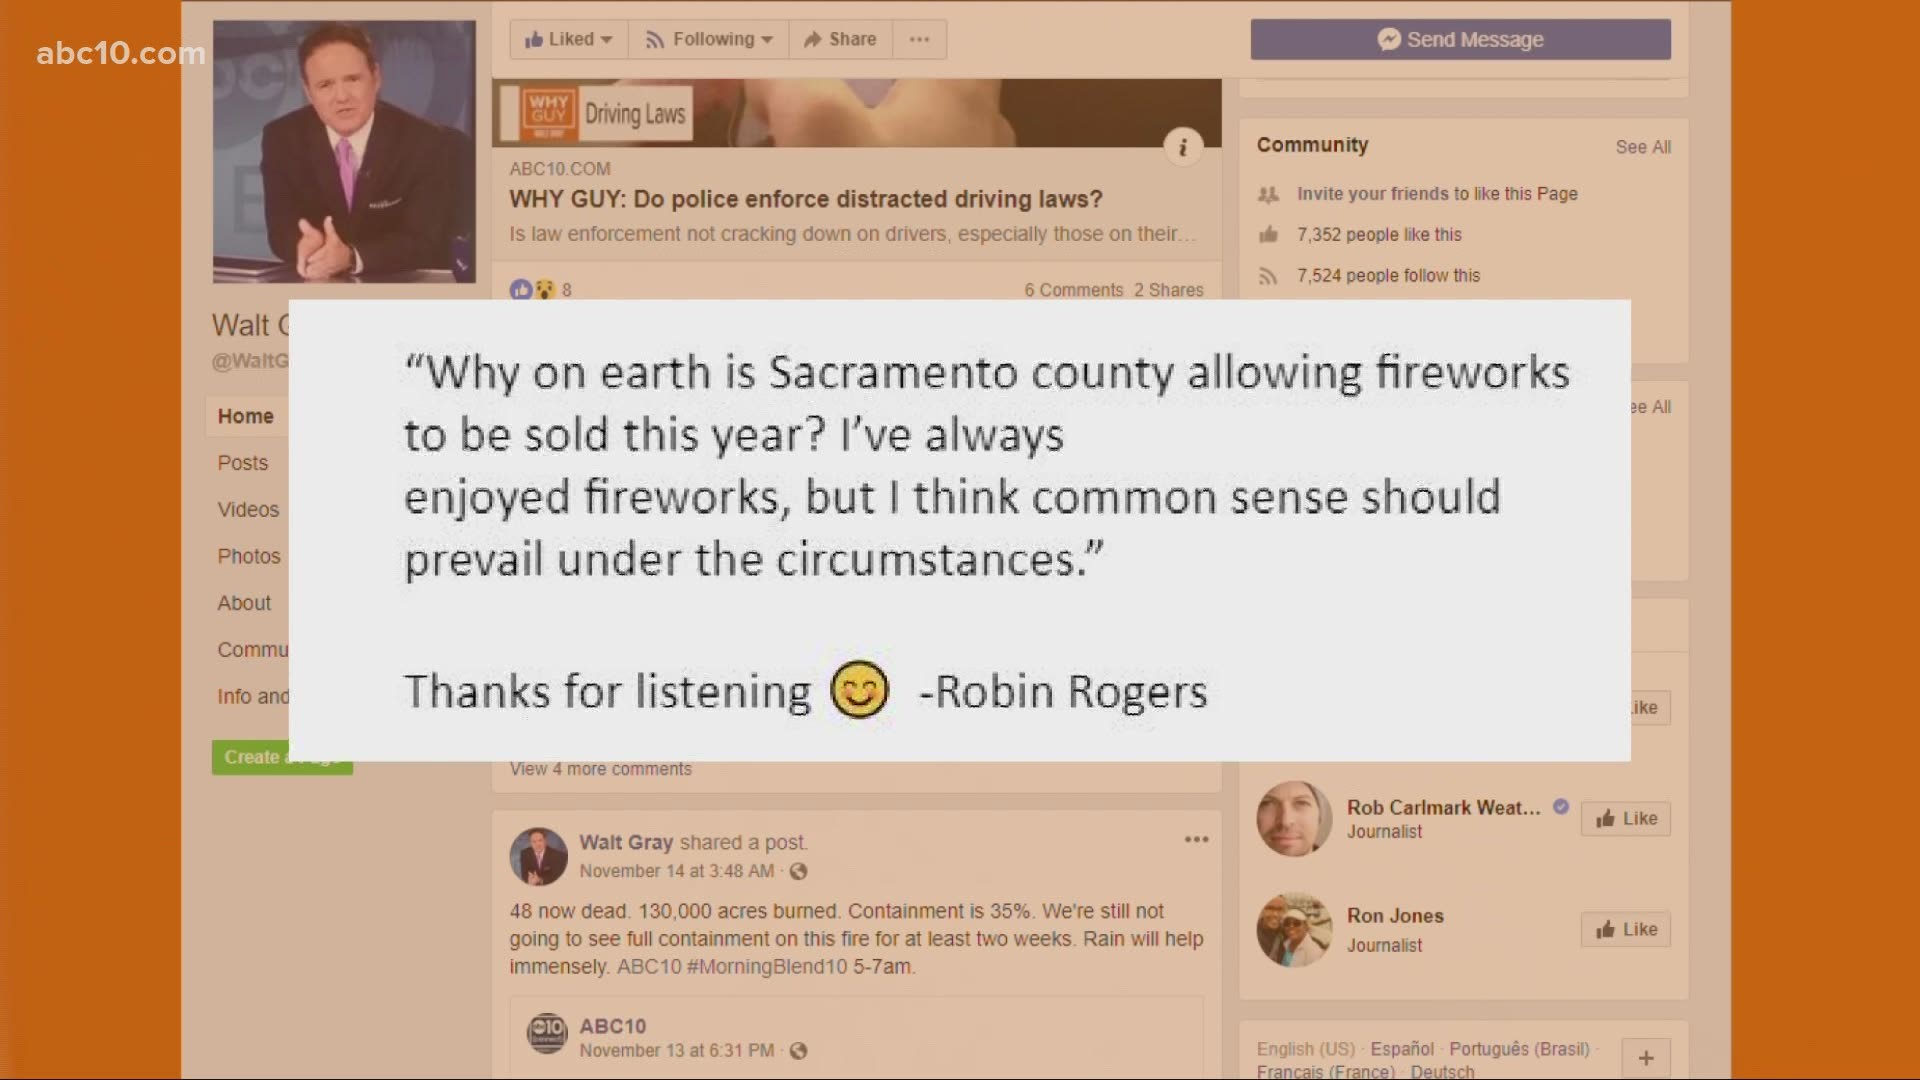 With the drought and heatwaves, one viewer wanted to know why fireworks would be allowed with the fire risk.